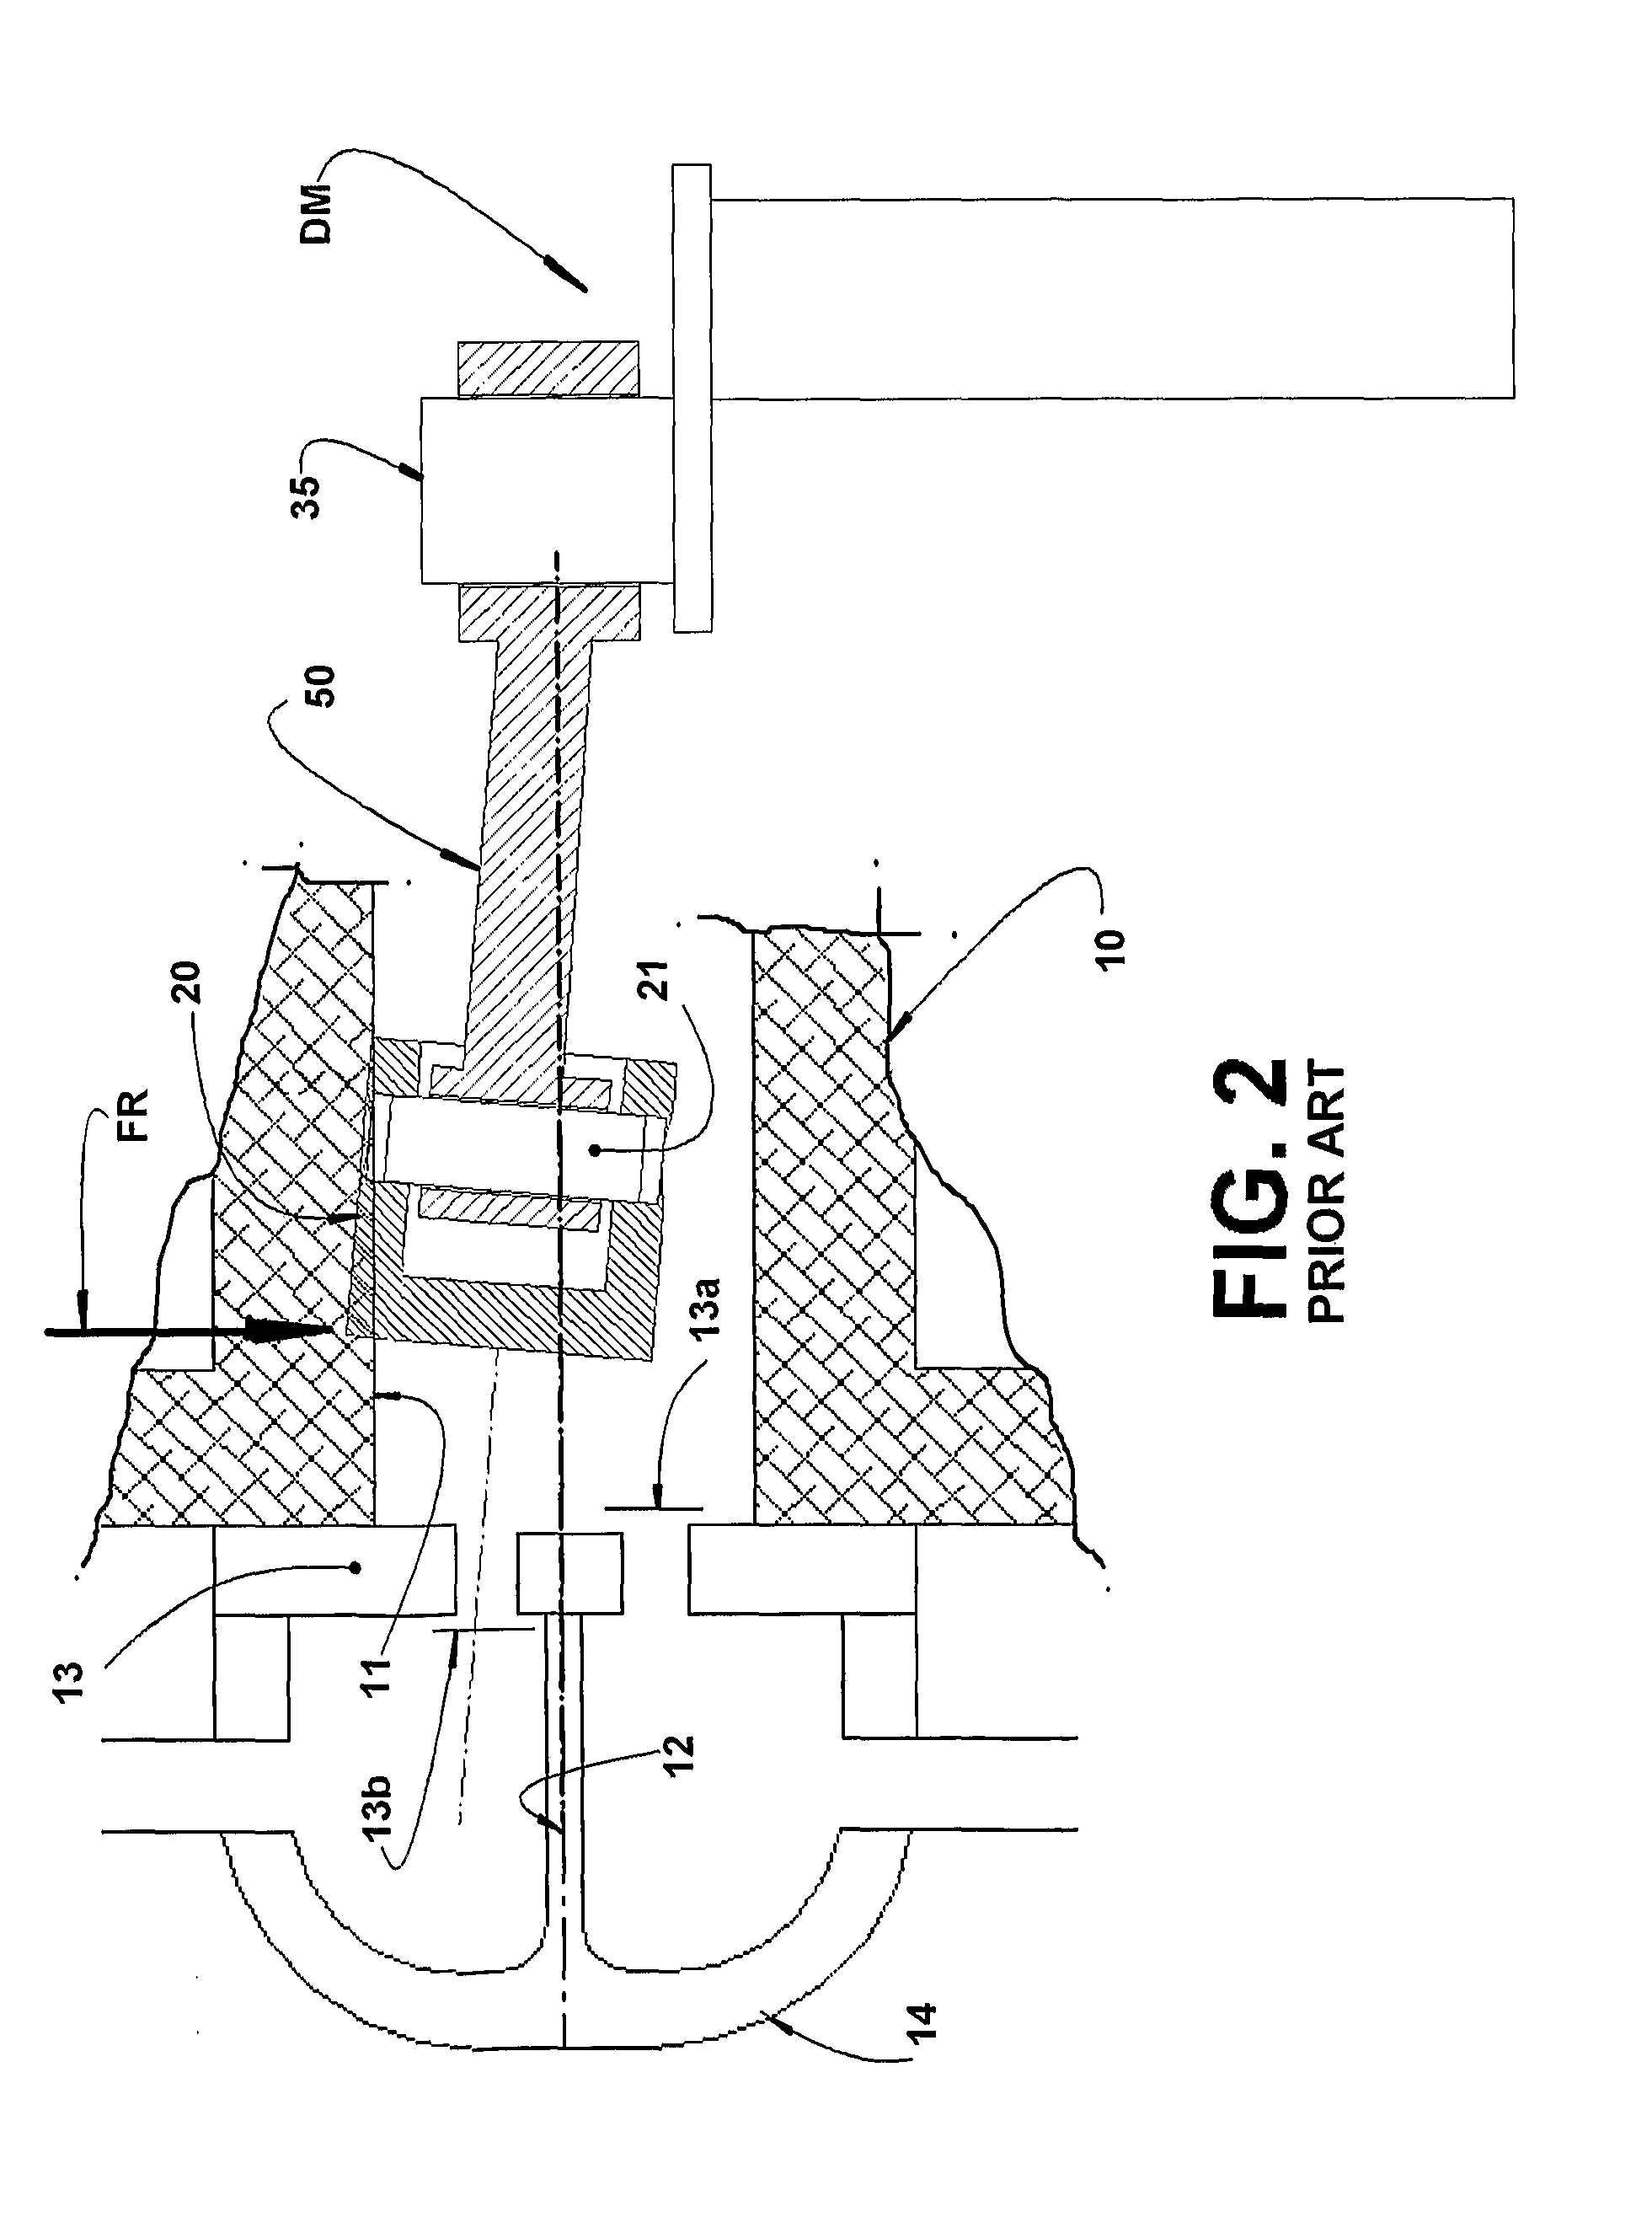 Driving Rod For The Piston Of A Reciprocating Compressor